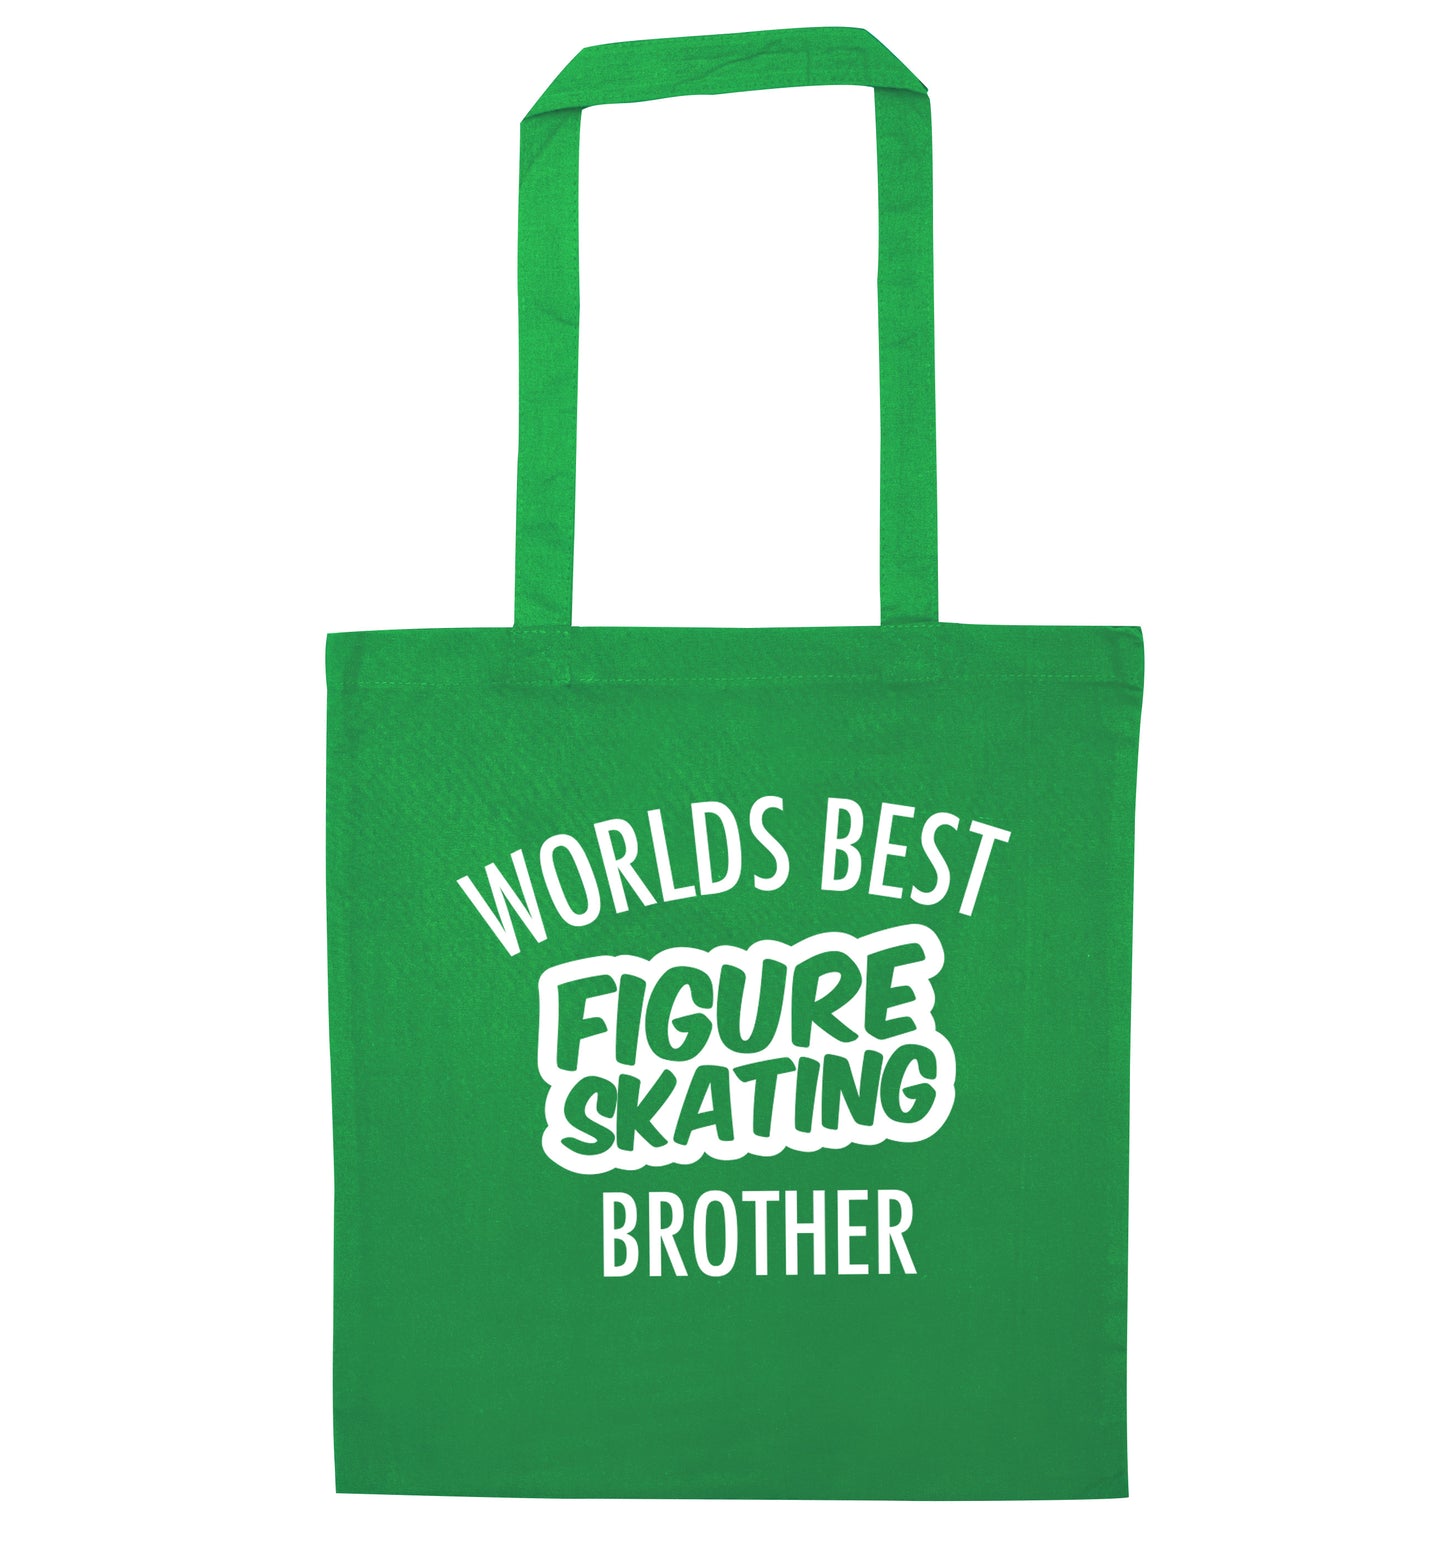 Worlds best figure skating brother green tote bag